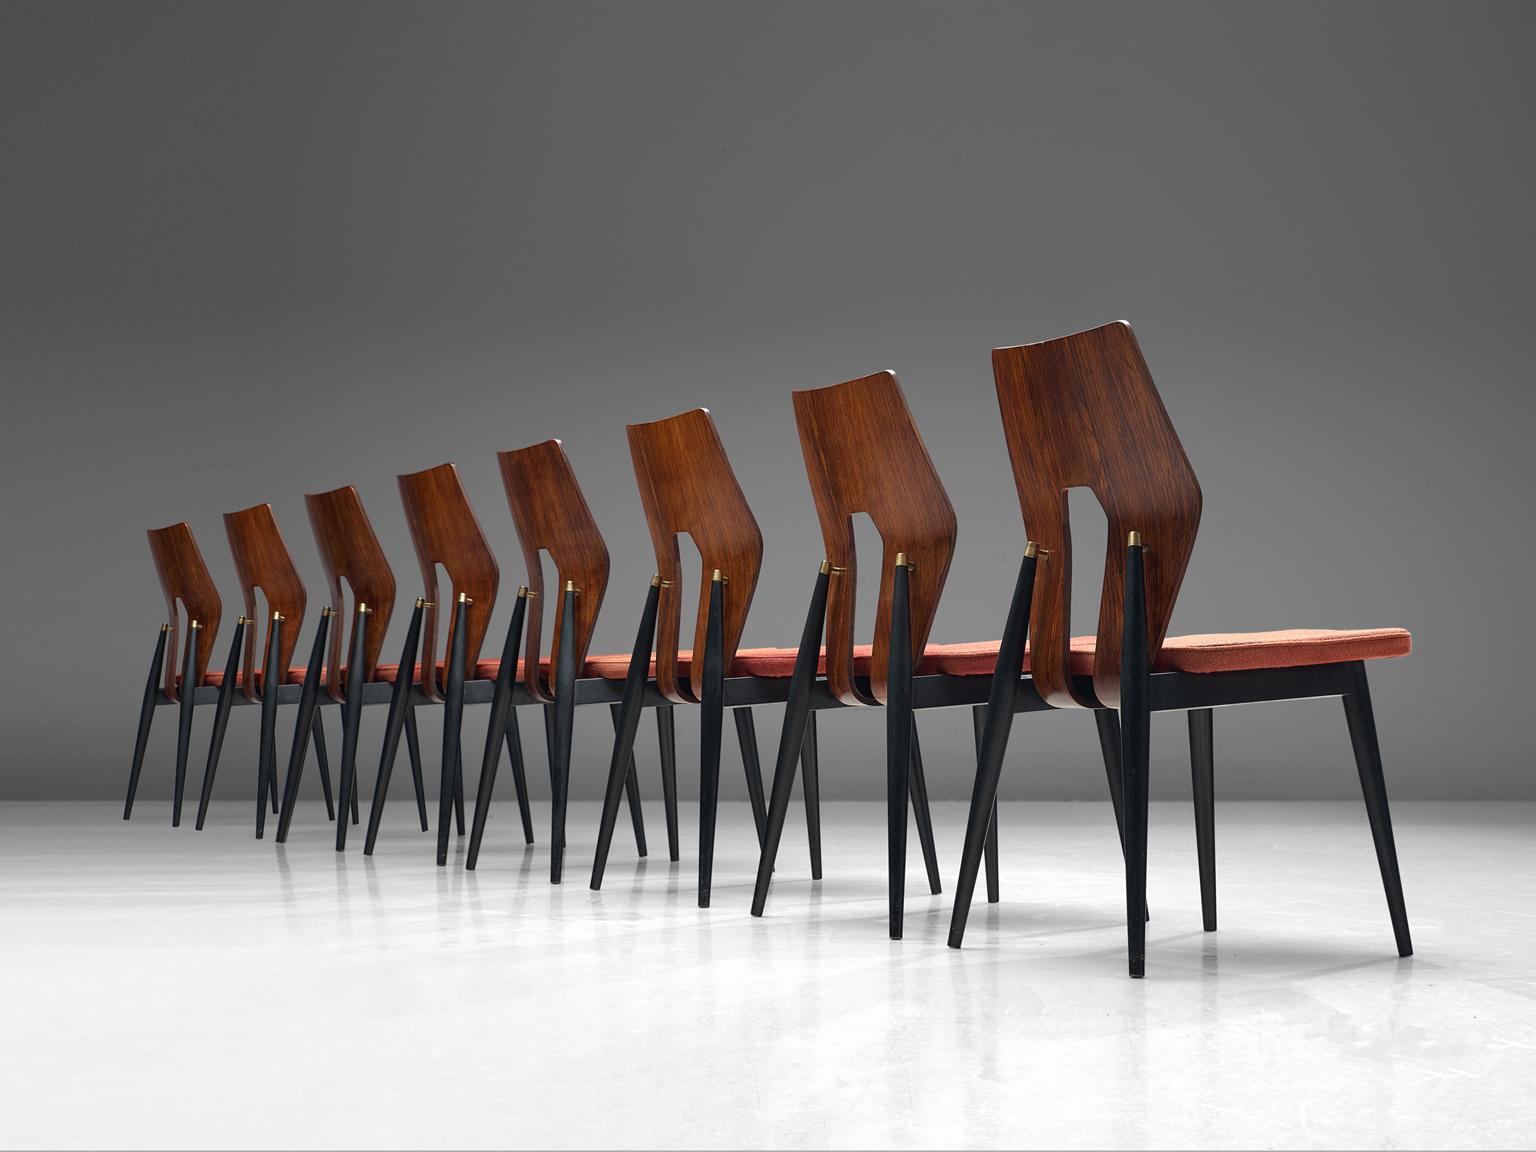 Meredew, set of 8 dining chairs, rosewood, brass, wood and fabric, United Kingdom, 1960s.

These Meredew 1960s dining chairs will make an elegant addition to your dining room. Their wonderfully sculpted backs are finished on both sides with